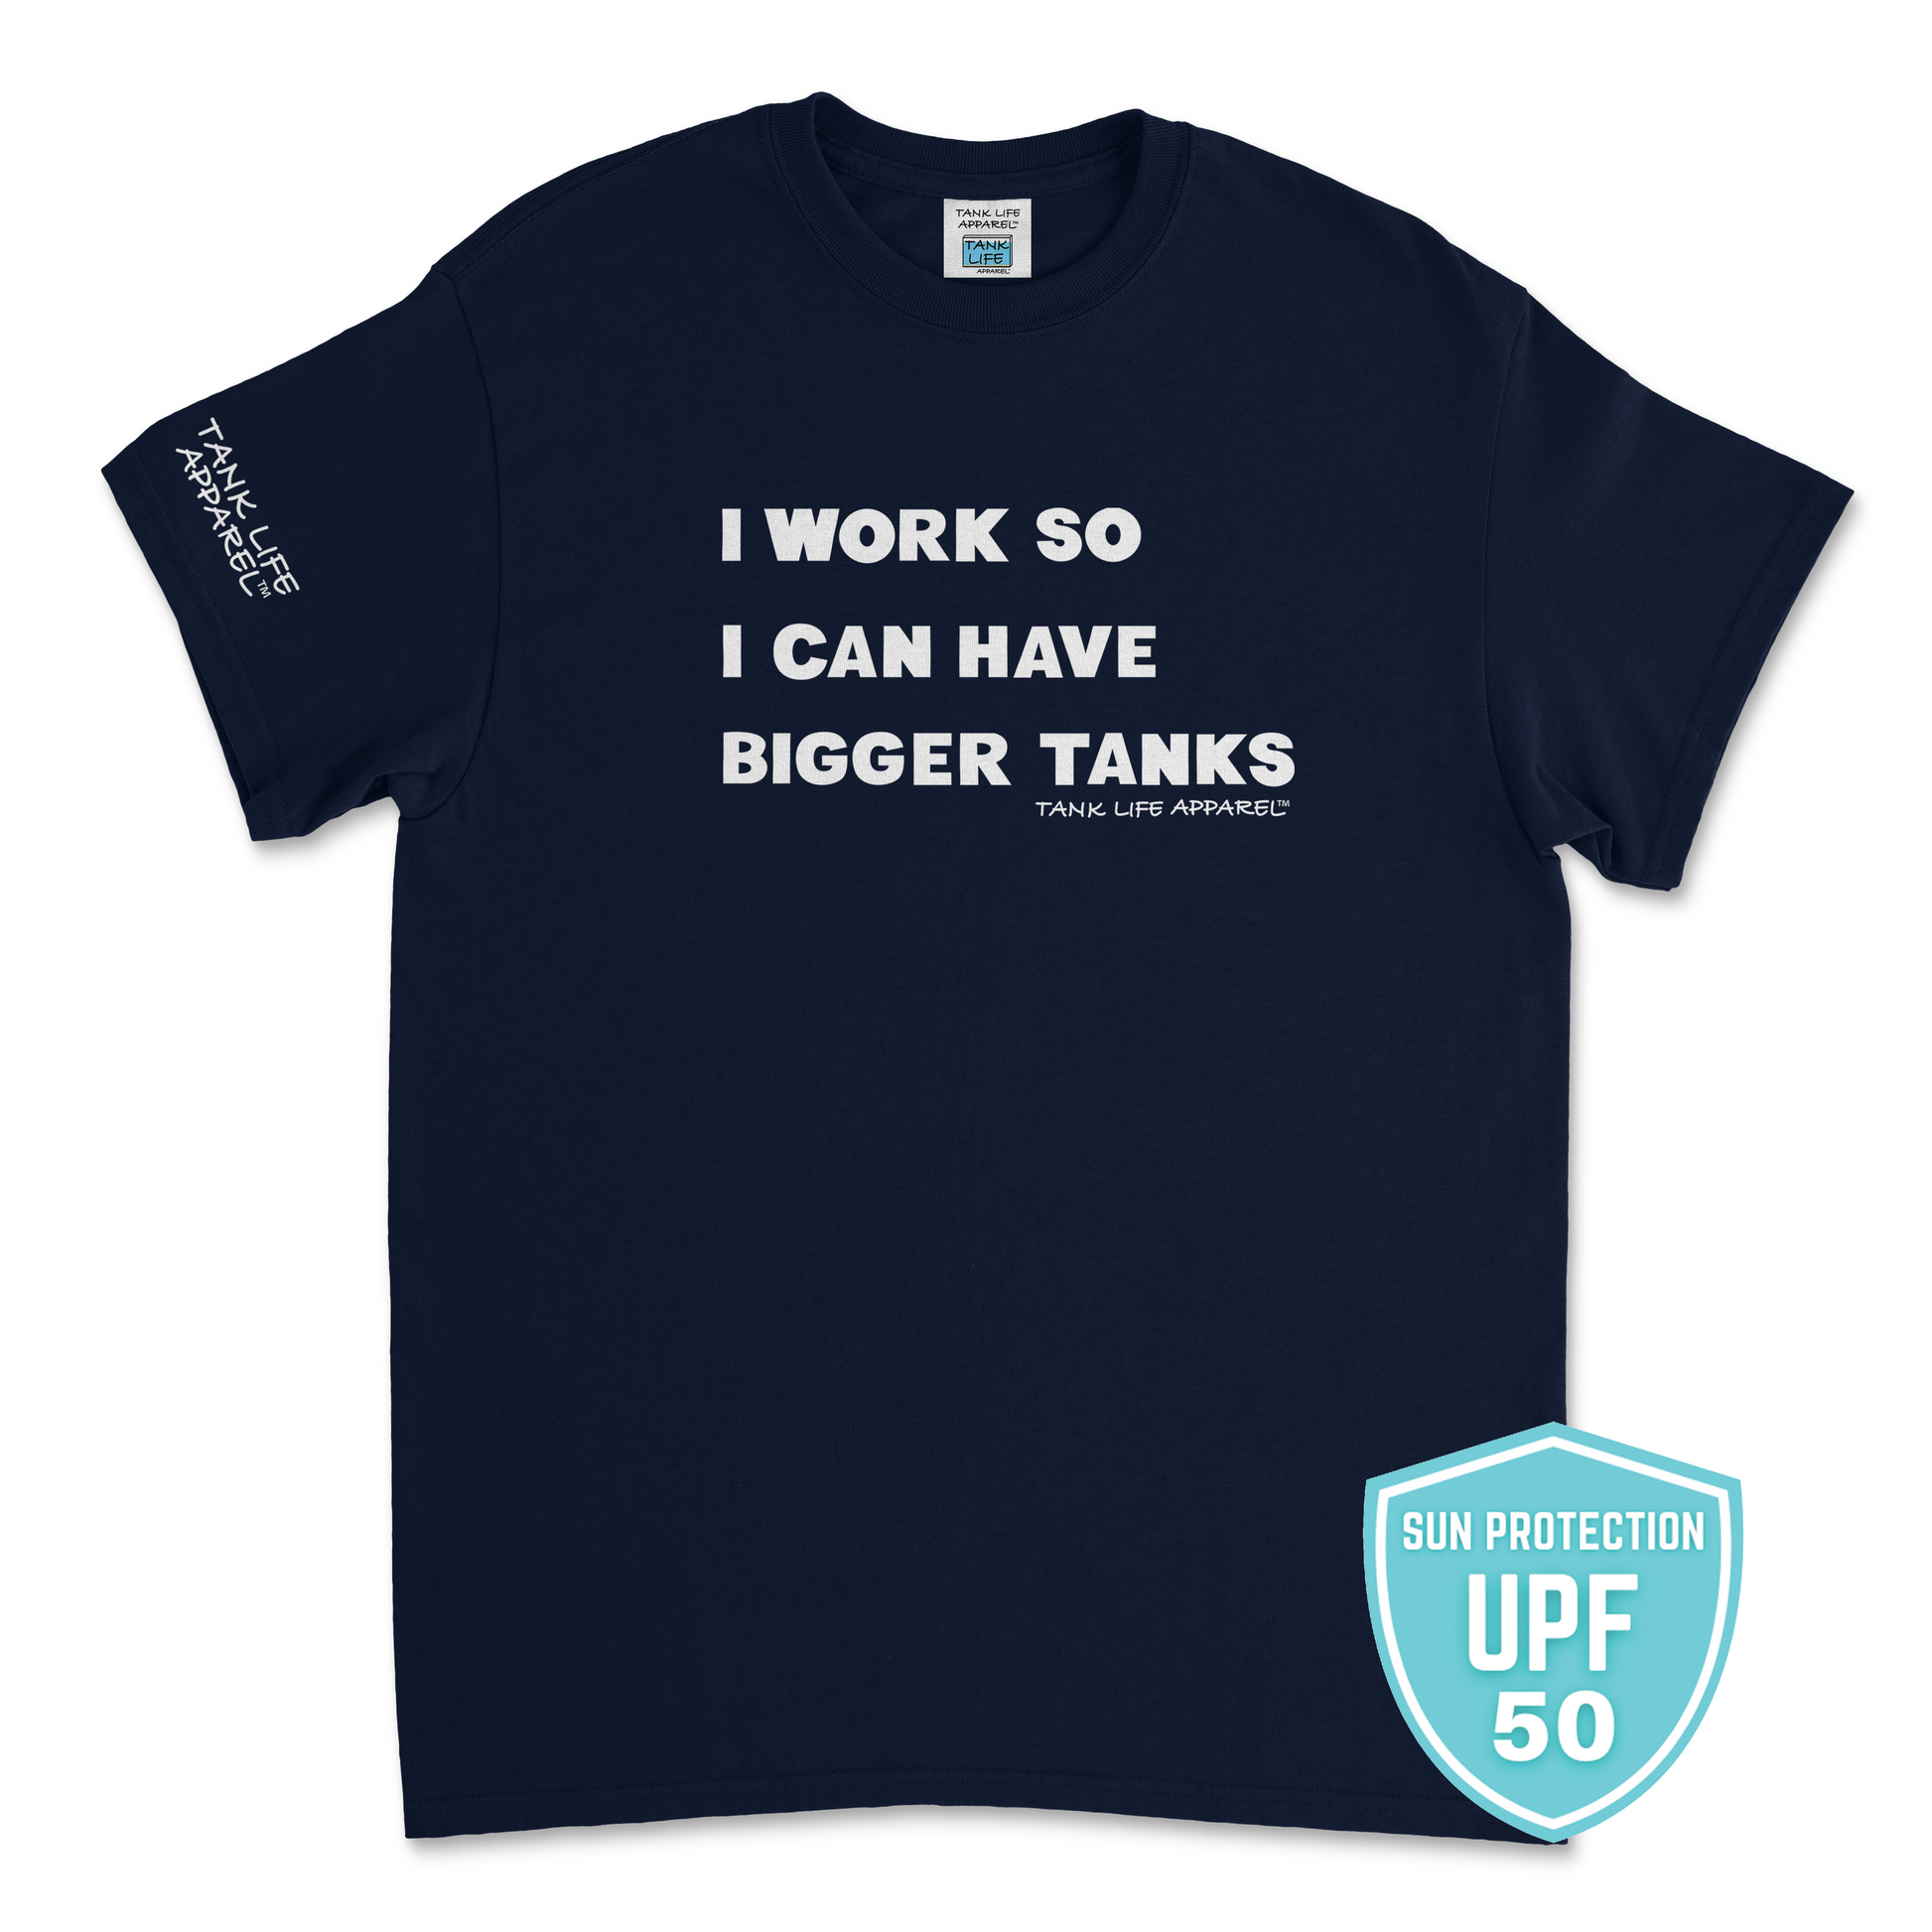 Tank Life Apparel "I work so I can have bigger tanks" design on an athletic dri fit performance shirt. This is a 100% polyester shirt in navy. UPF rating of 50 which protects you from UV rays from the sun.